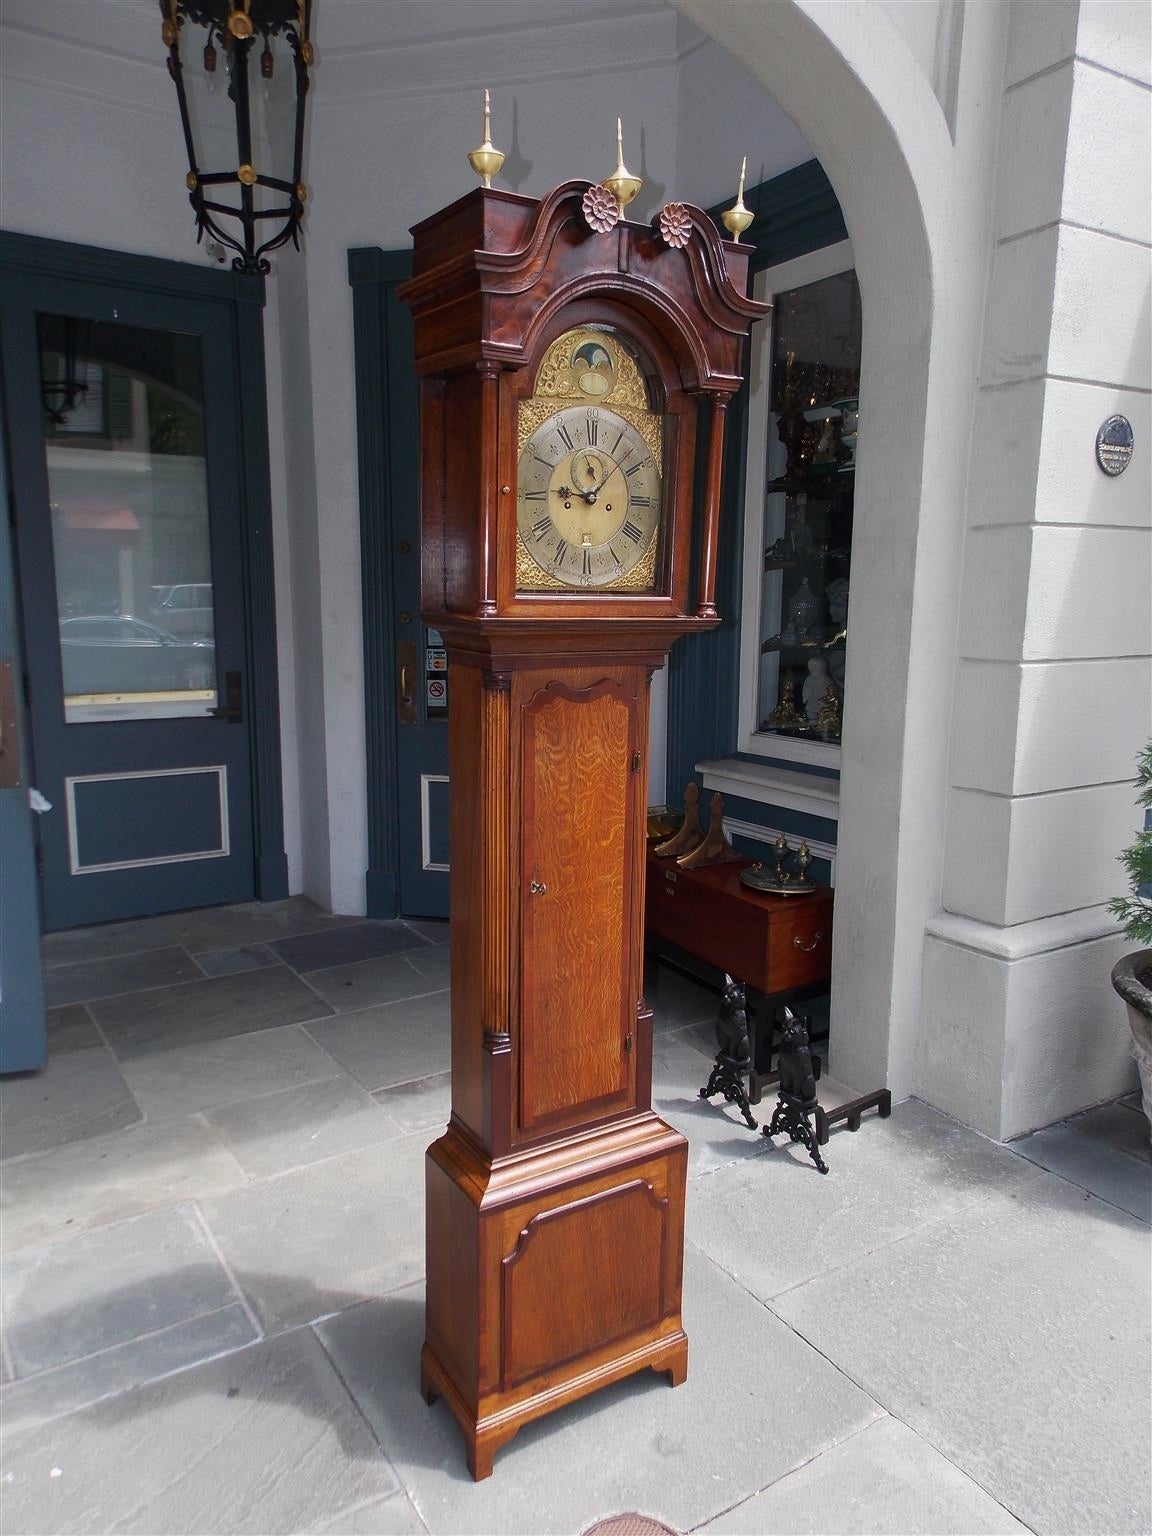 English Chestnut and Mahogany tall case clock with broken arch pediment, floral rosettes, original brass urn finials, dolphin and figural ormolu face, original arched hood with glass door, cross banded trunk and terminating on rectangular molded